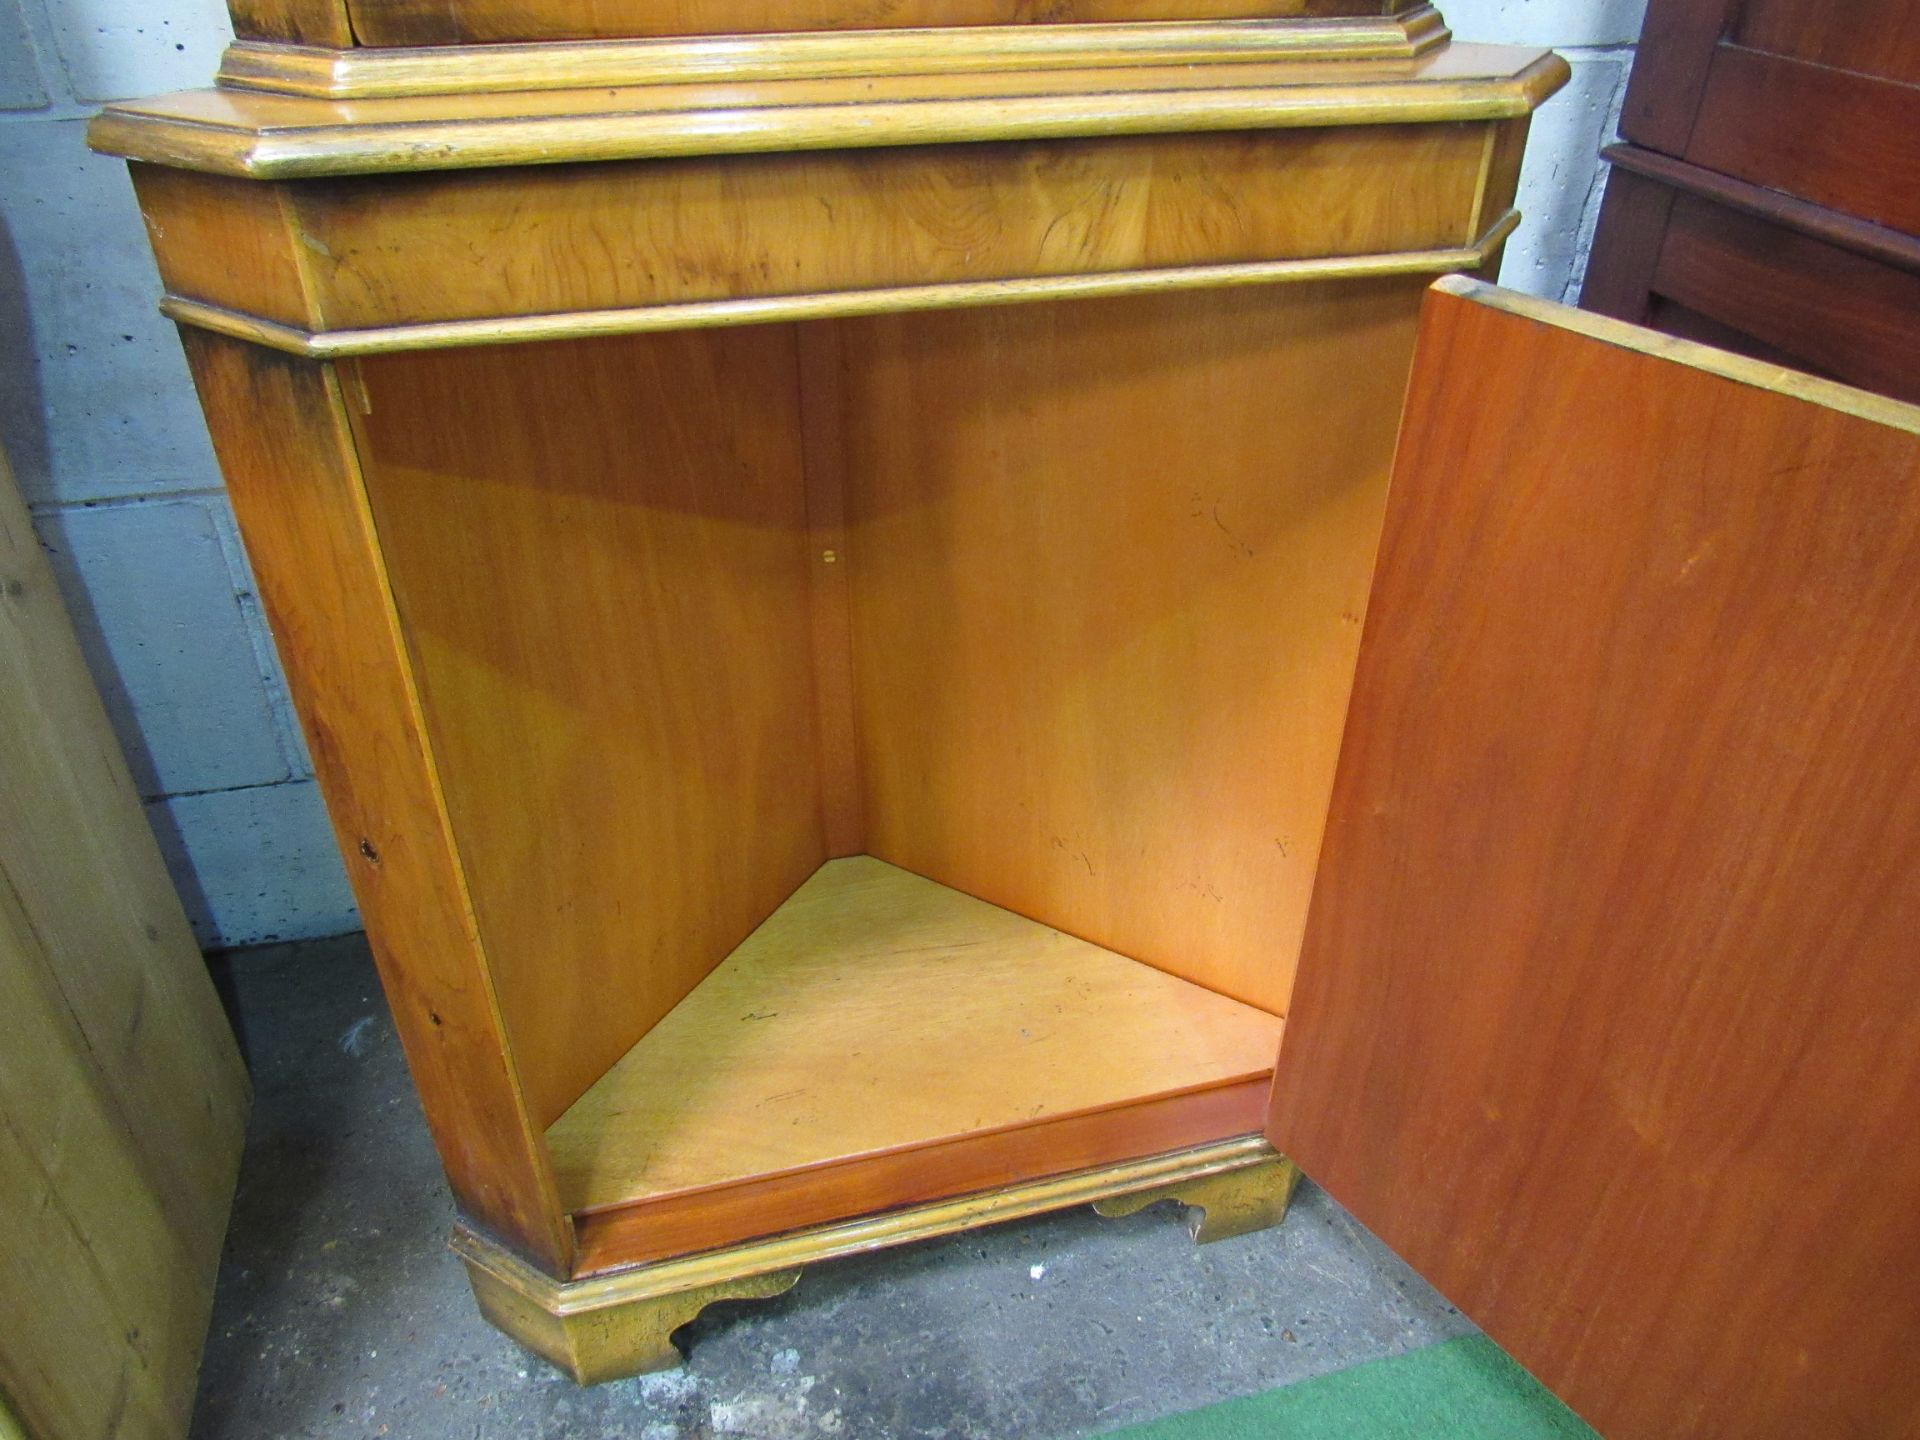 Yew wood corner cabinet with glass door above cupboard. 63 x 41 x 183cms. Estimate £20-30. - Image 2 of 2